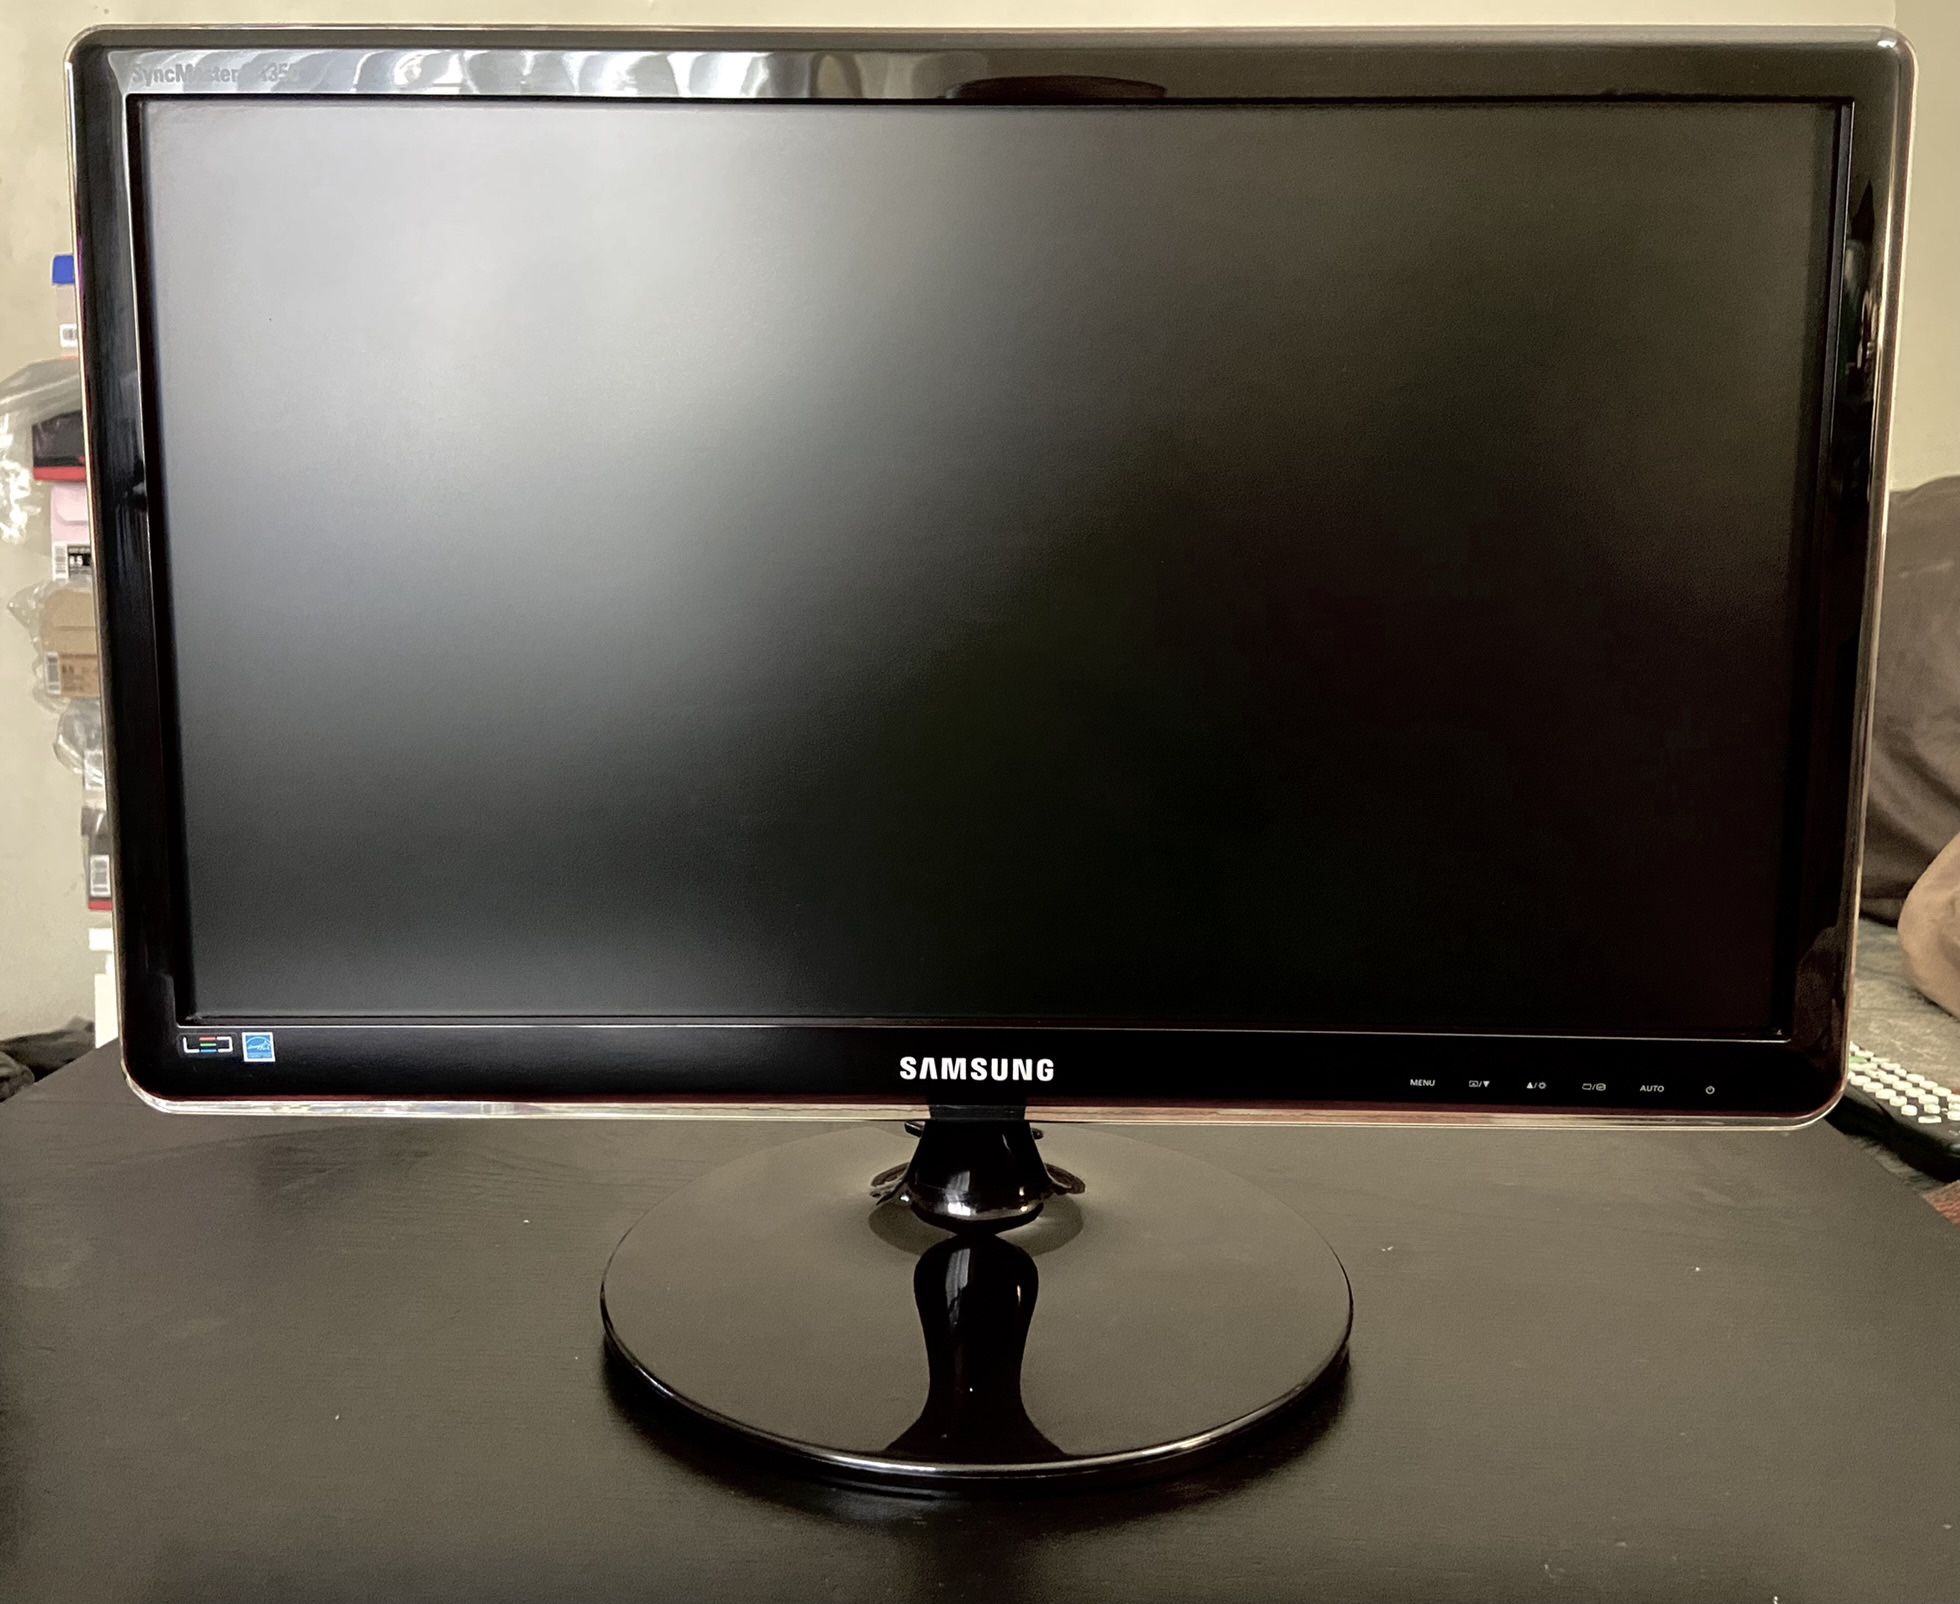 Samsung SyncMaster SA350 23”LED PC Monitor, Excellent Condition